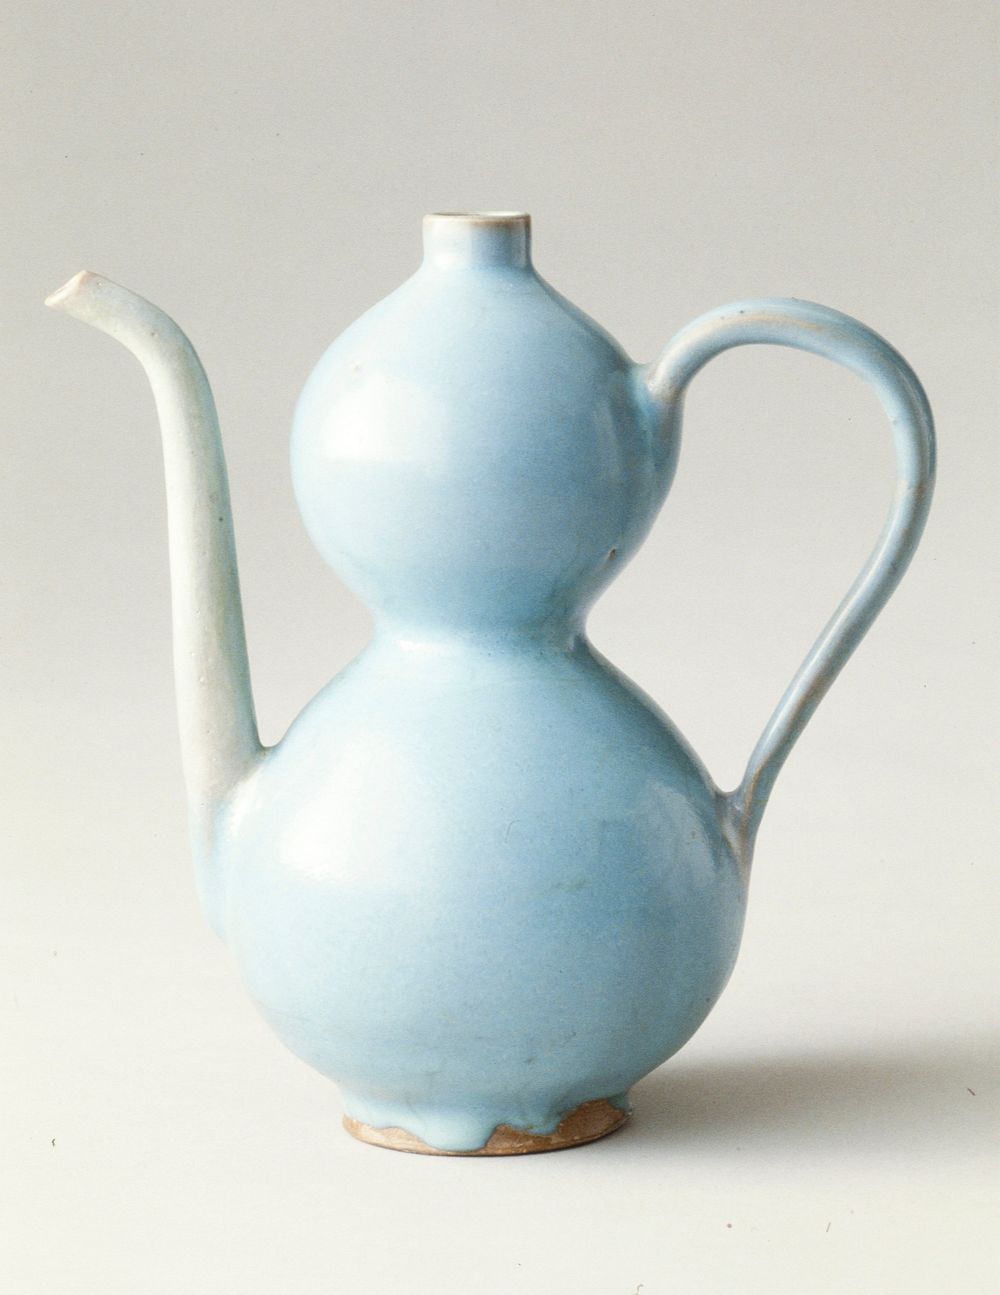 double gourd-shaped ewer, Sung Dynasty, Chun ware; porcelaneous stoneware with blue glaze. Original from the Minneapolis…